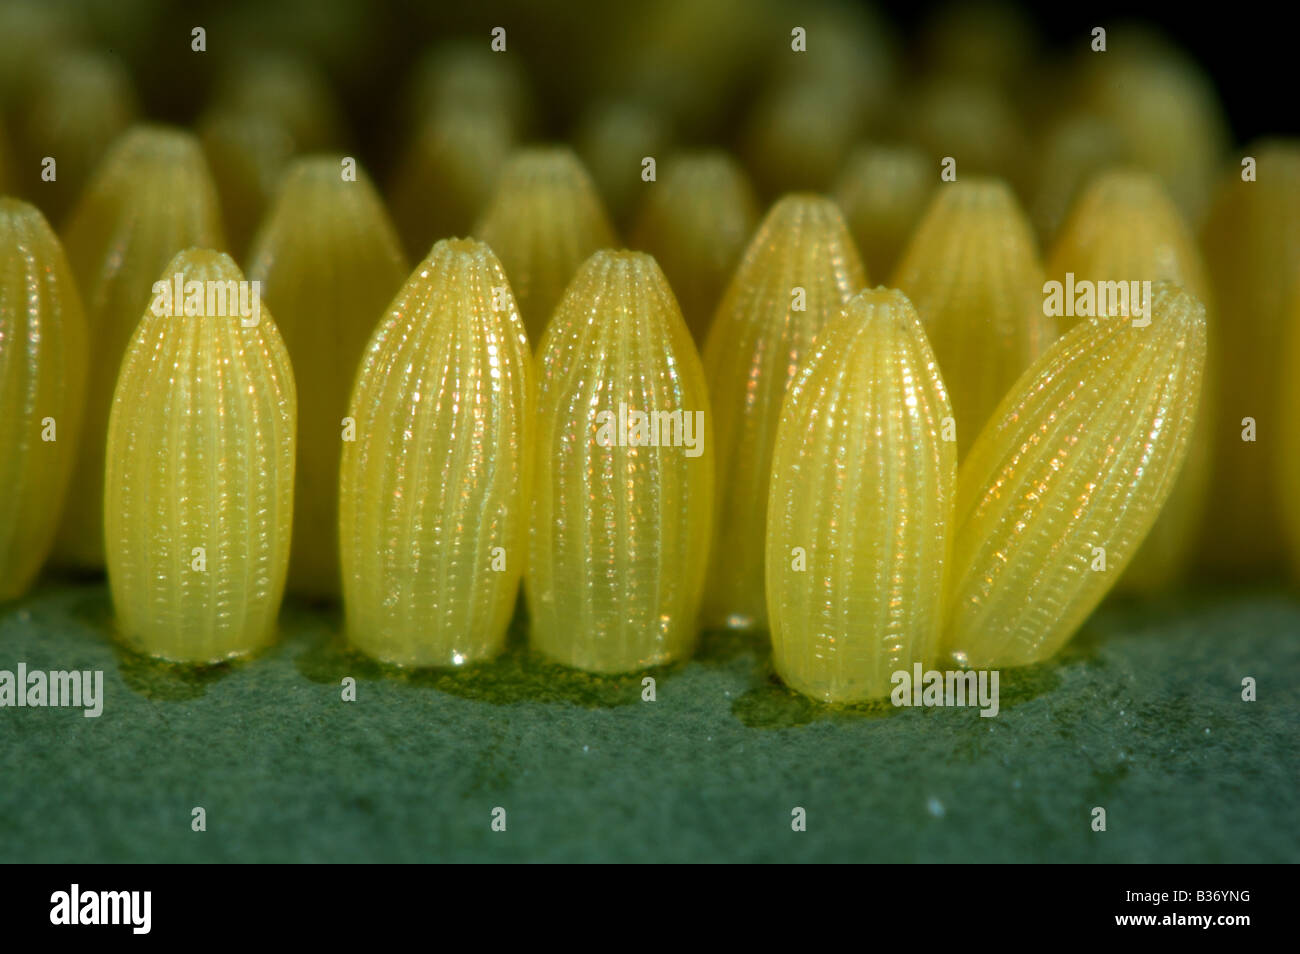 Cabbage white butterfly Pieris brassicae eggs on a cabbage leaf Stock Photo